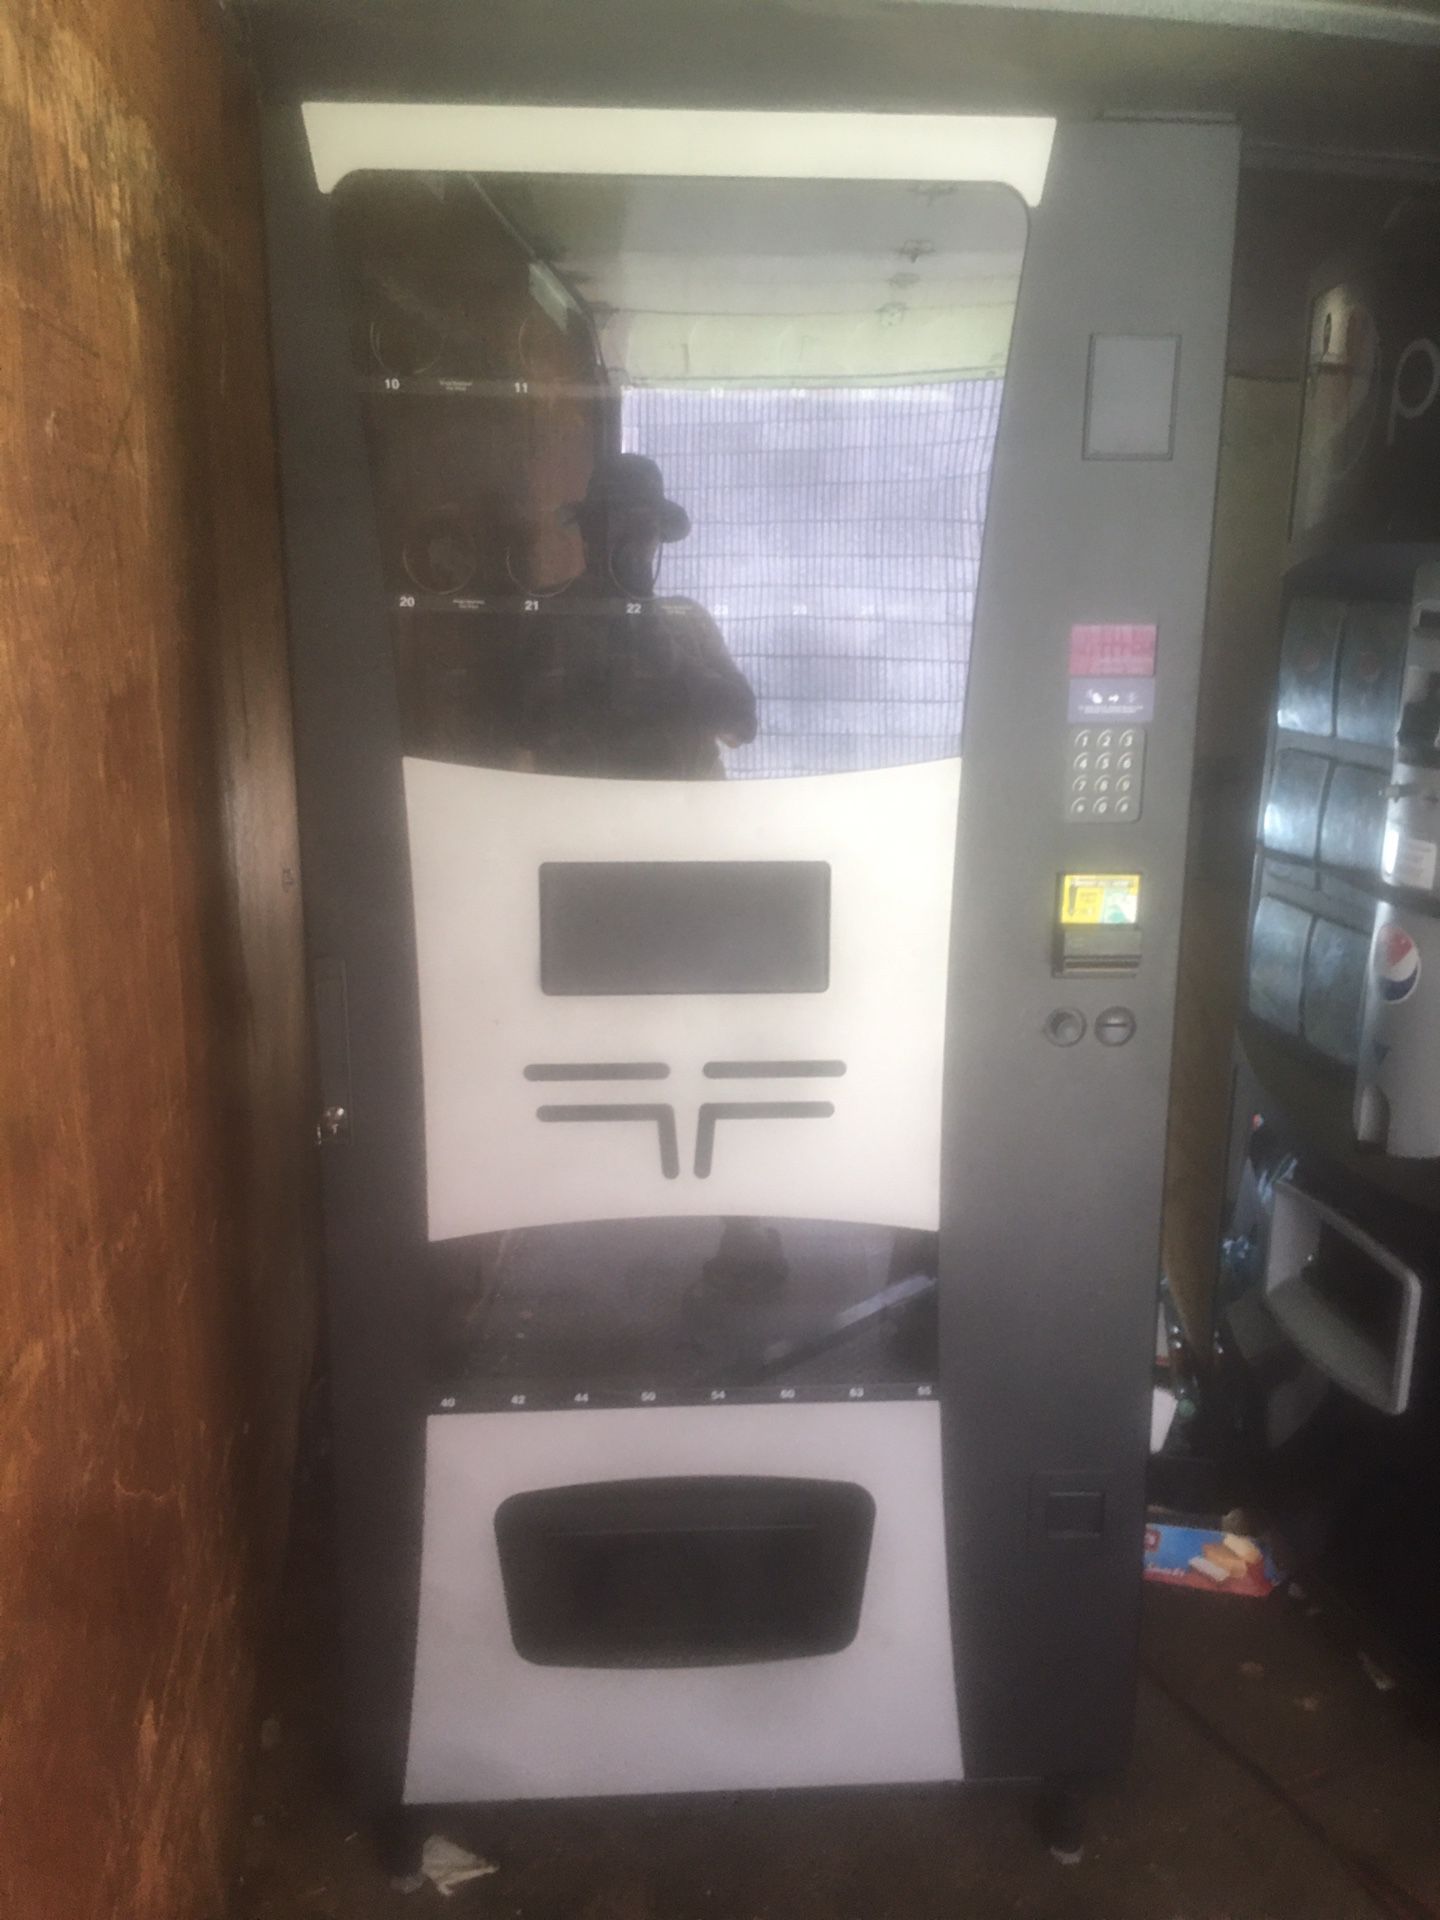 Wittern Futura combo vending machine with credit card reader option